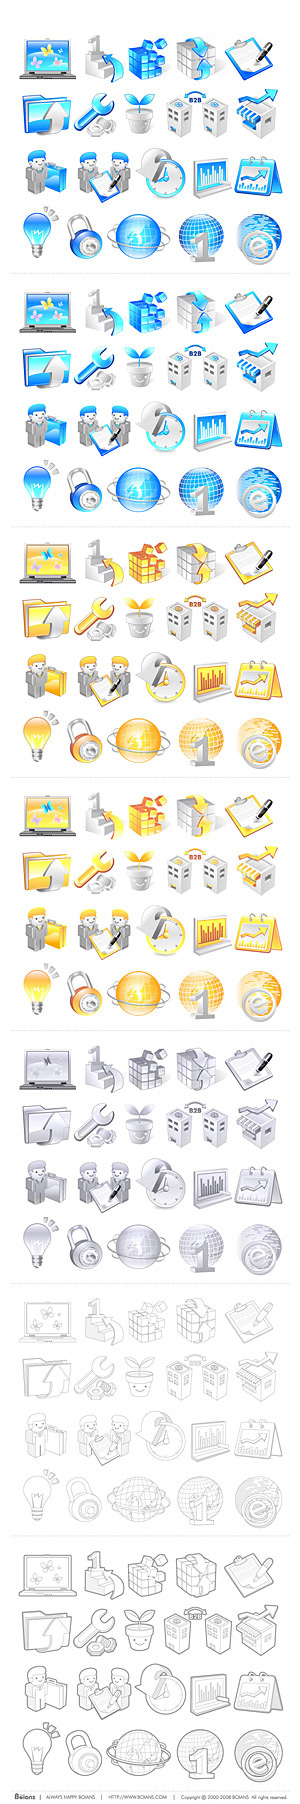 Blue and orange business icons vector user statistics lock lighting houses and shops earth disk curve clock buildings   